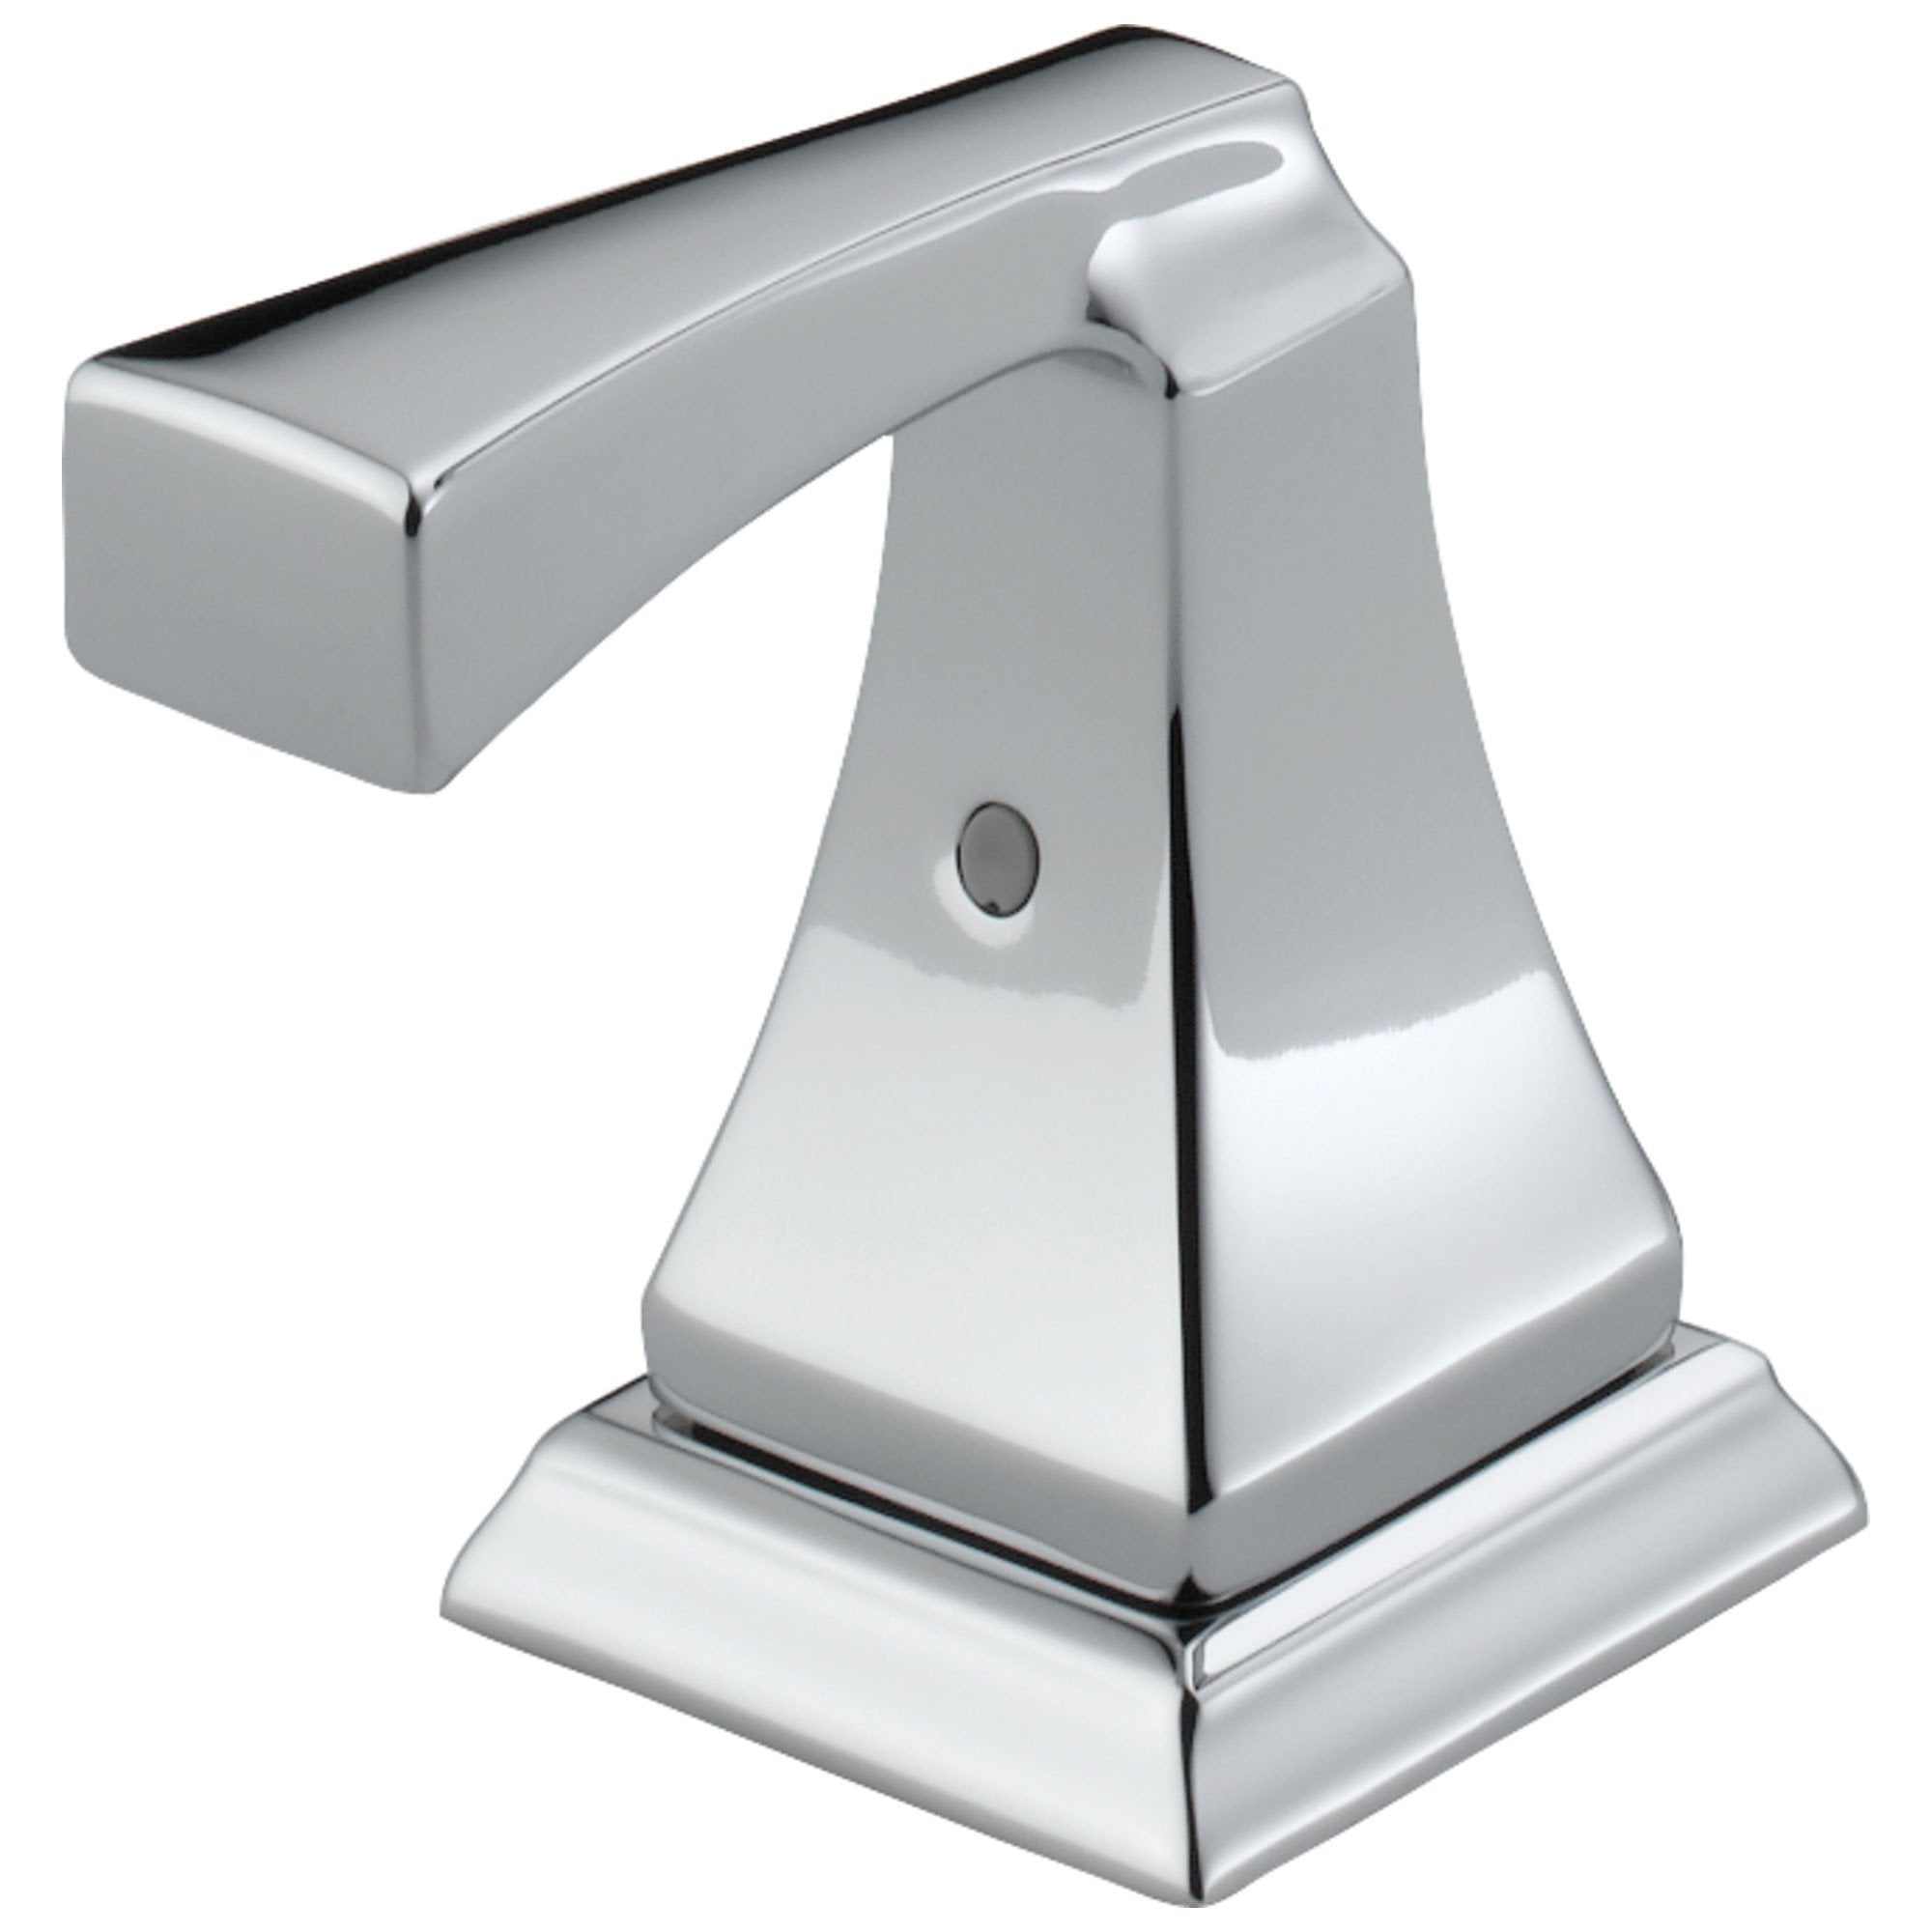 Delta Dryden Collection Chrome Finish Lavatory Metal Lever Handles - Quantity 2 Included DH251